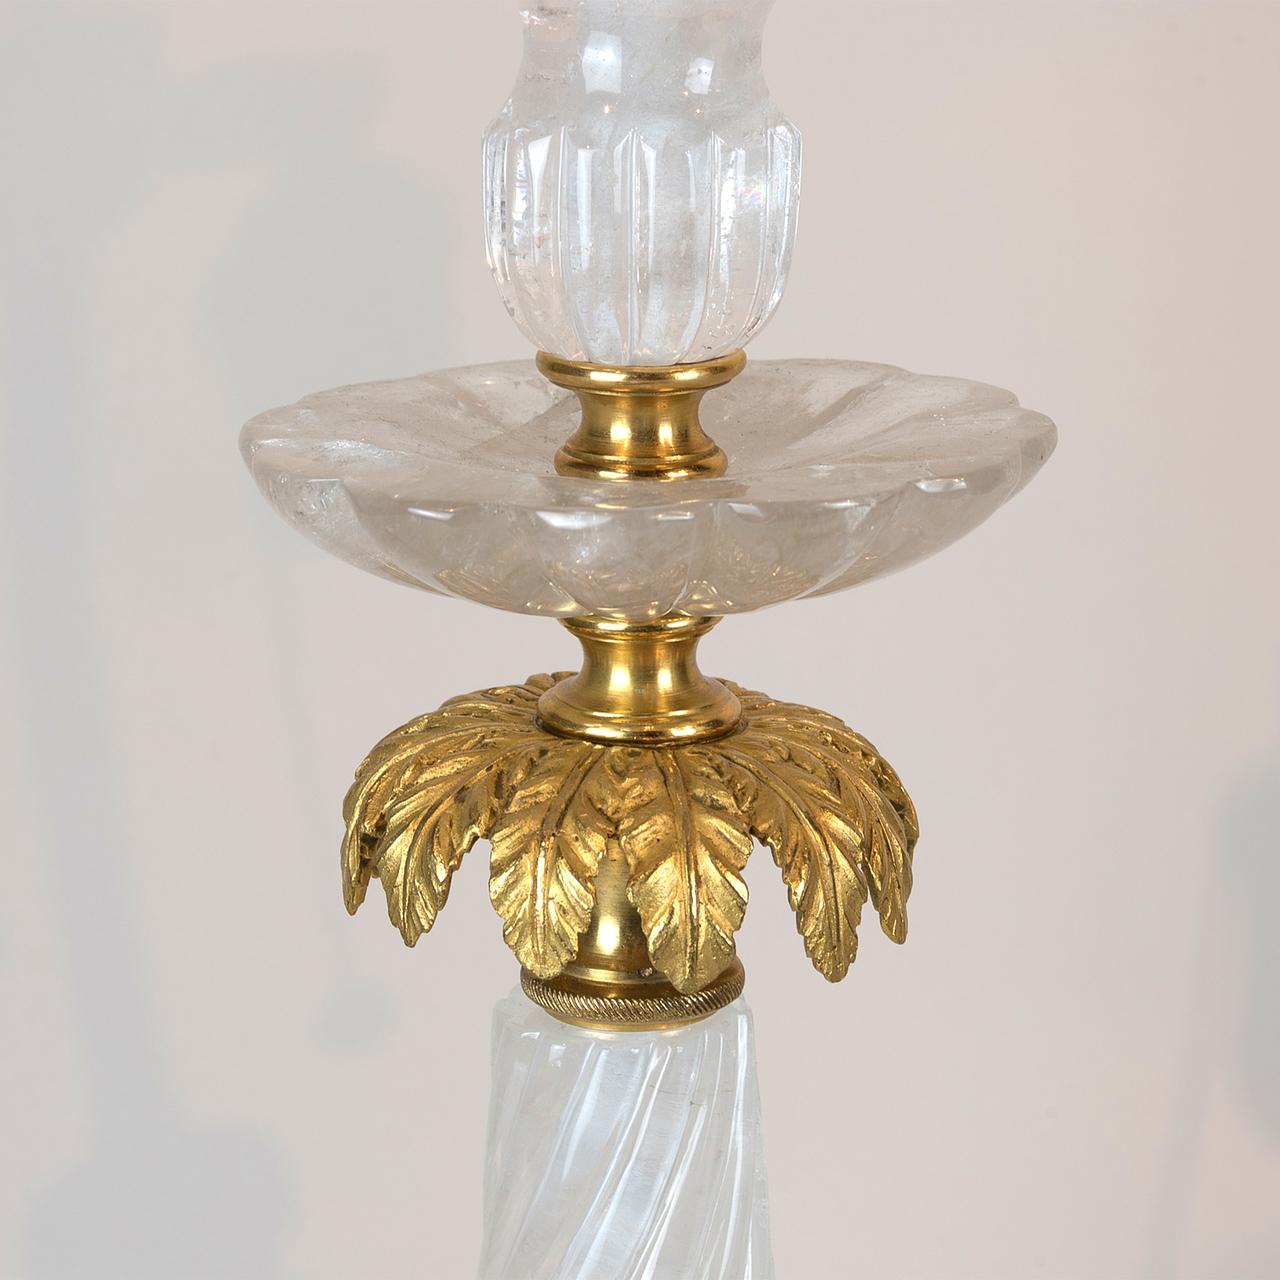 A fine pair of gilt bronze and rock crystal pearl shape table lamps. 

Origin: Continental
Date: Early 20th century
Dimension: 31 1/4 in x 8 in x 8 in.